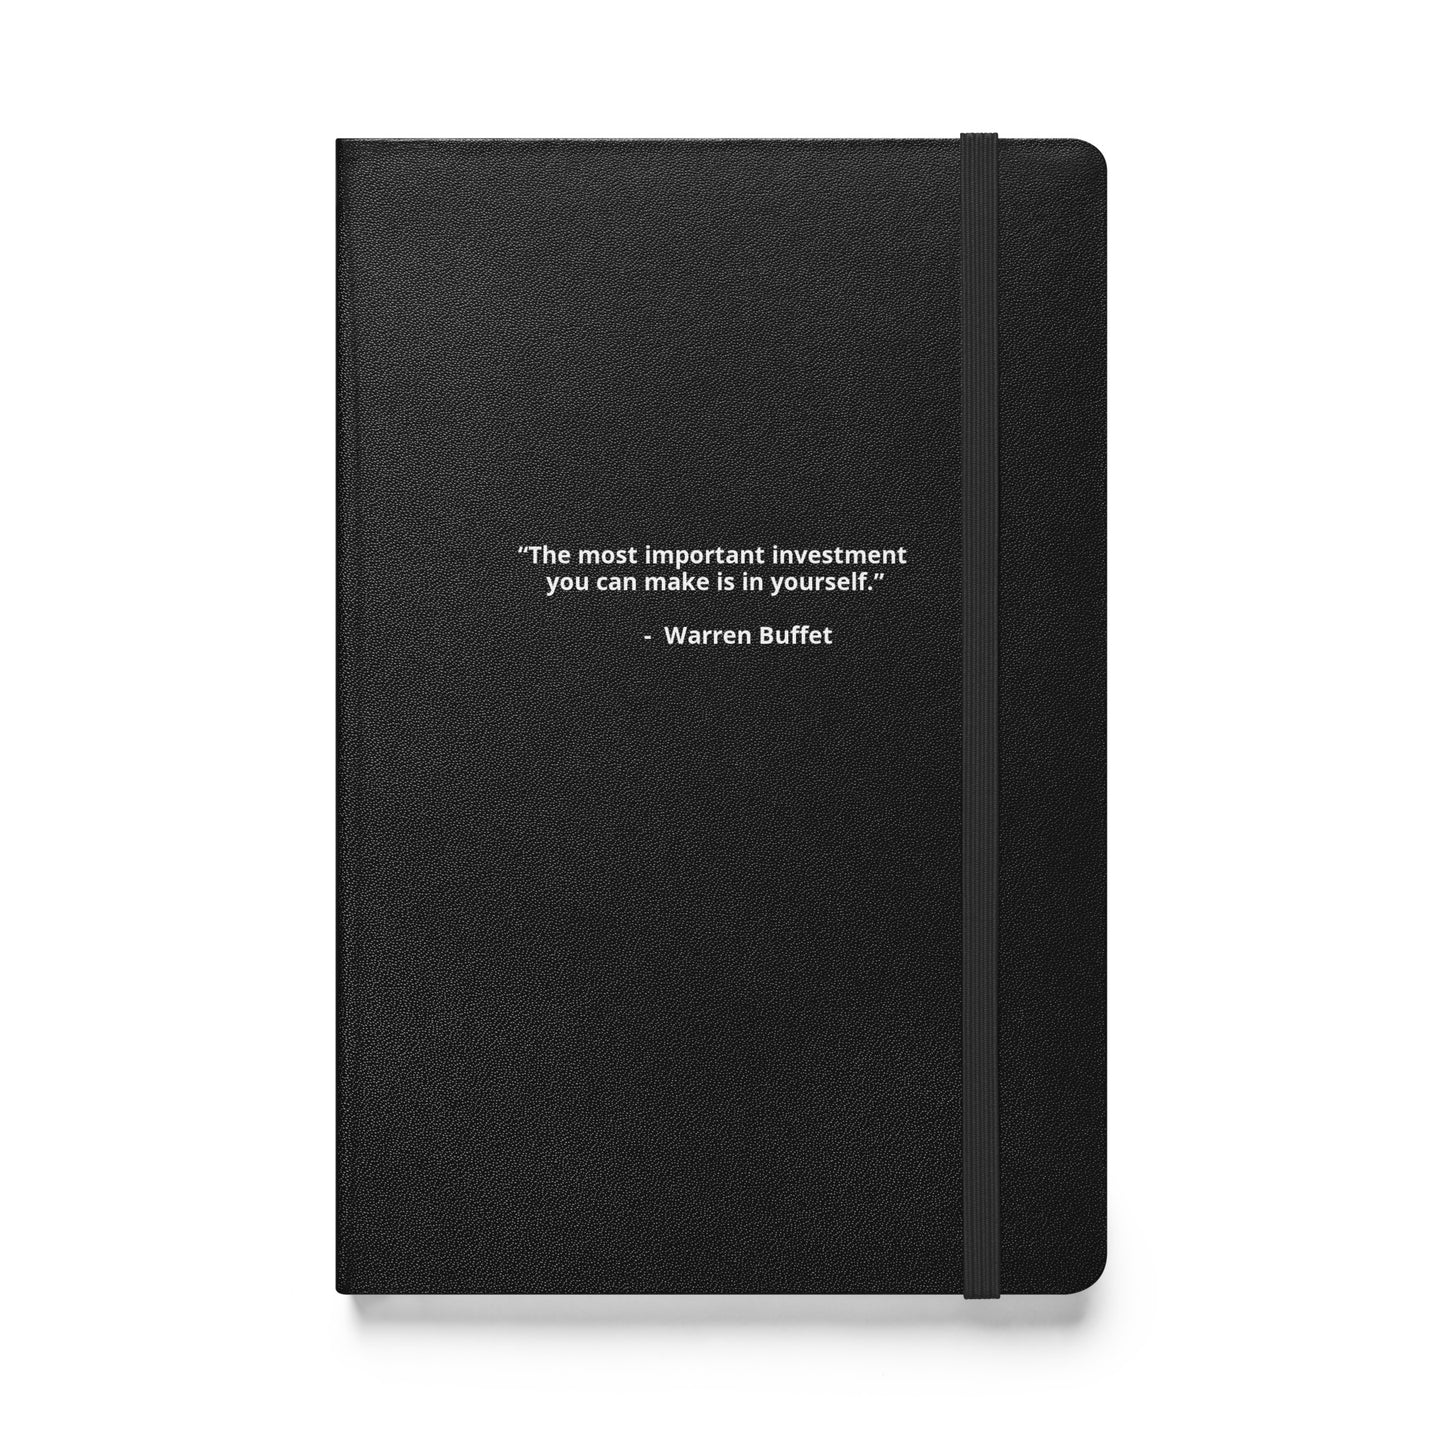 “The most important investment you can make is in yourself.” - Warren Buffet - Notebook